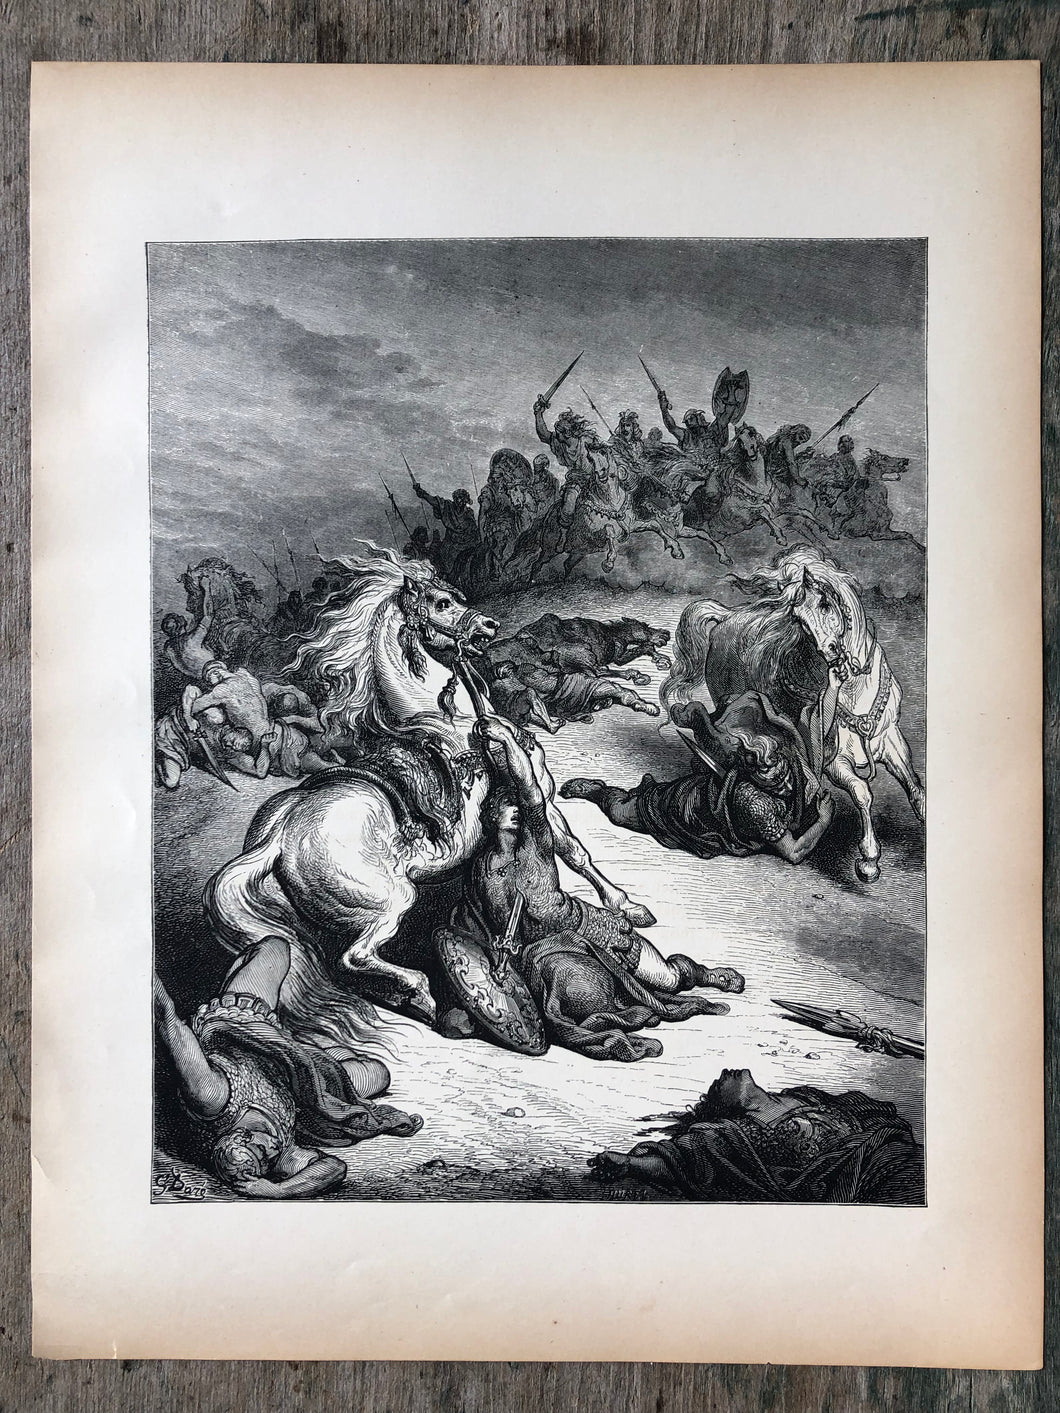 The Death of Saul. From The Dore Bible Gallery by Gustave Dore